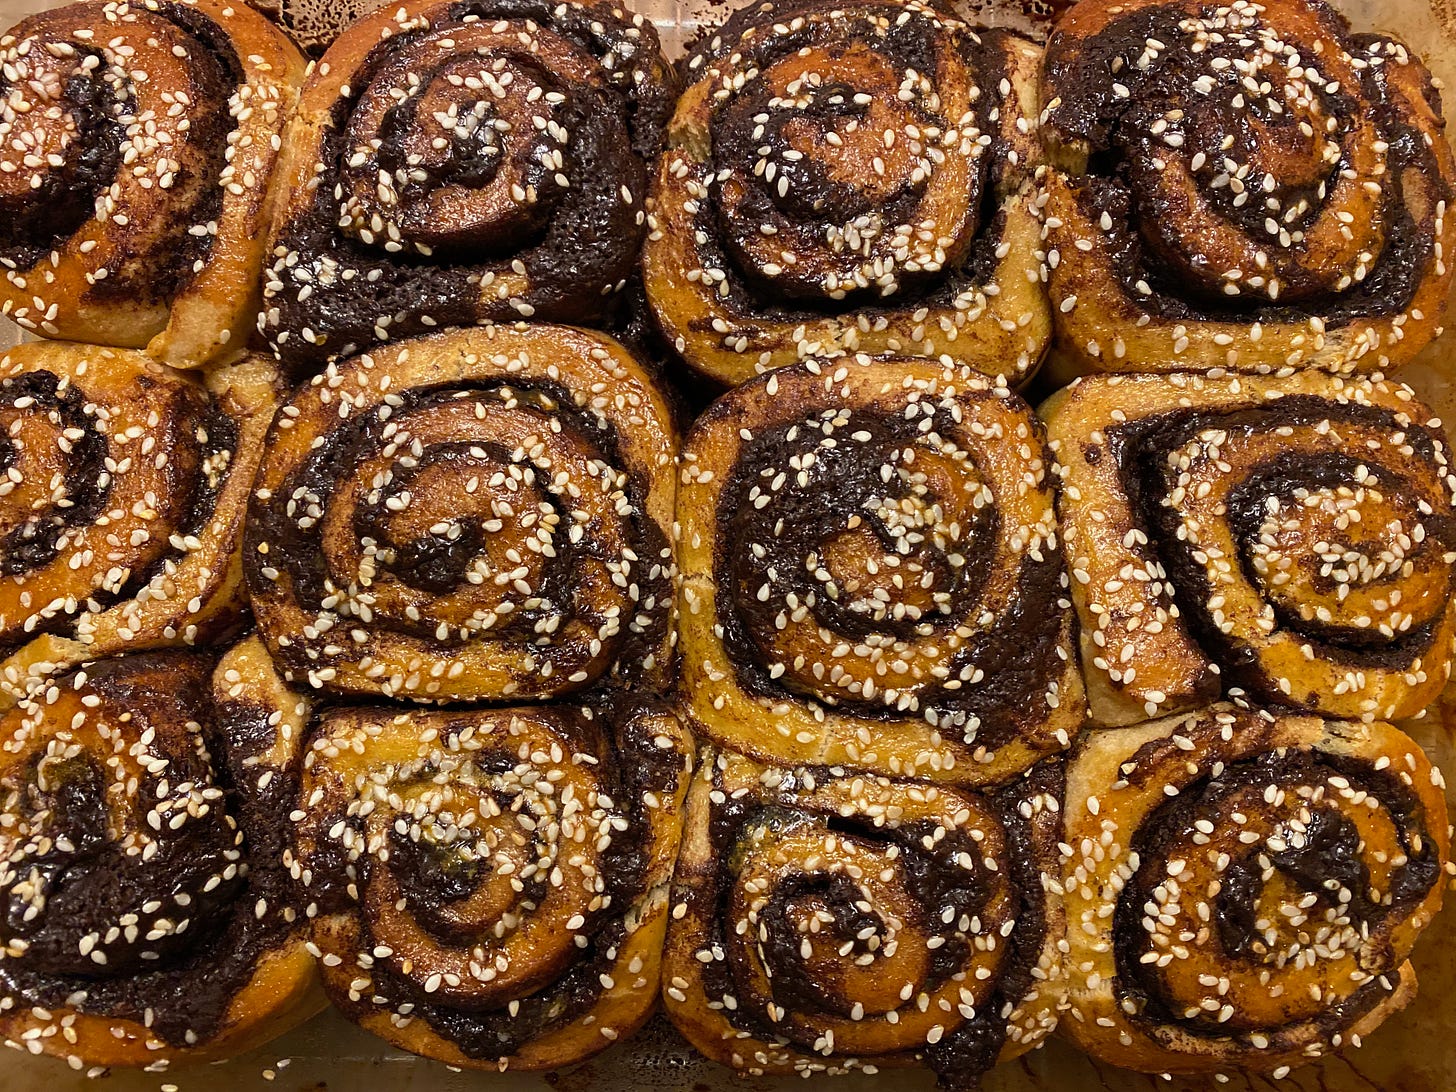 Closeup of a pan of golden-brown chocolate swirl buns sprinkled with sesame seeds.